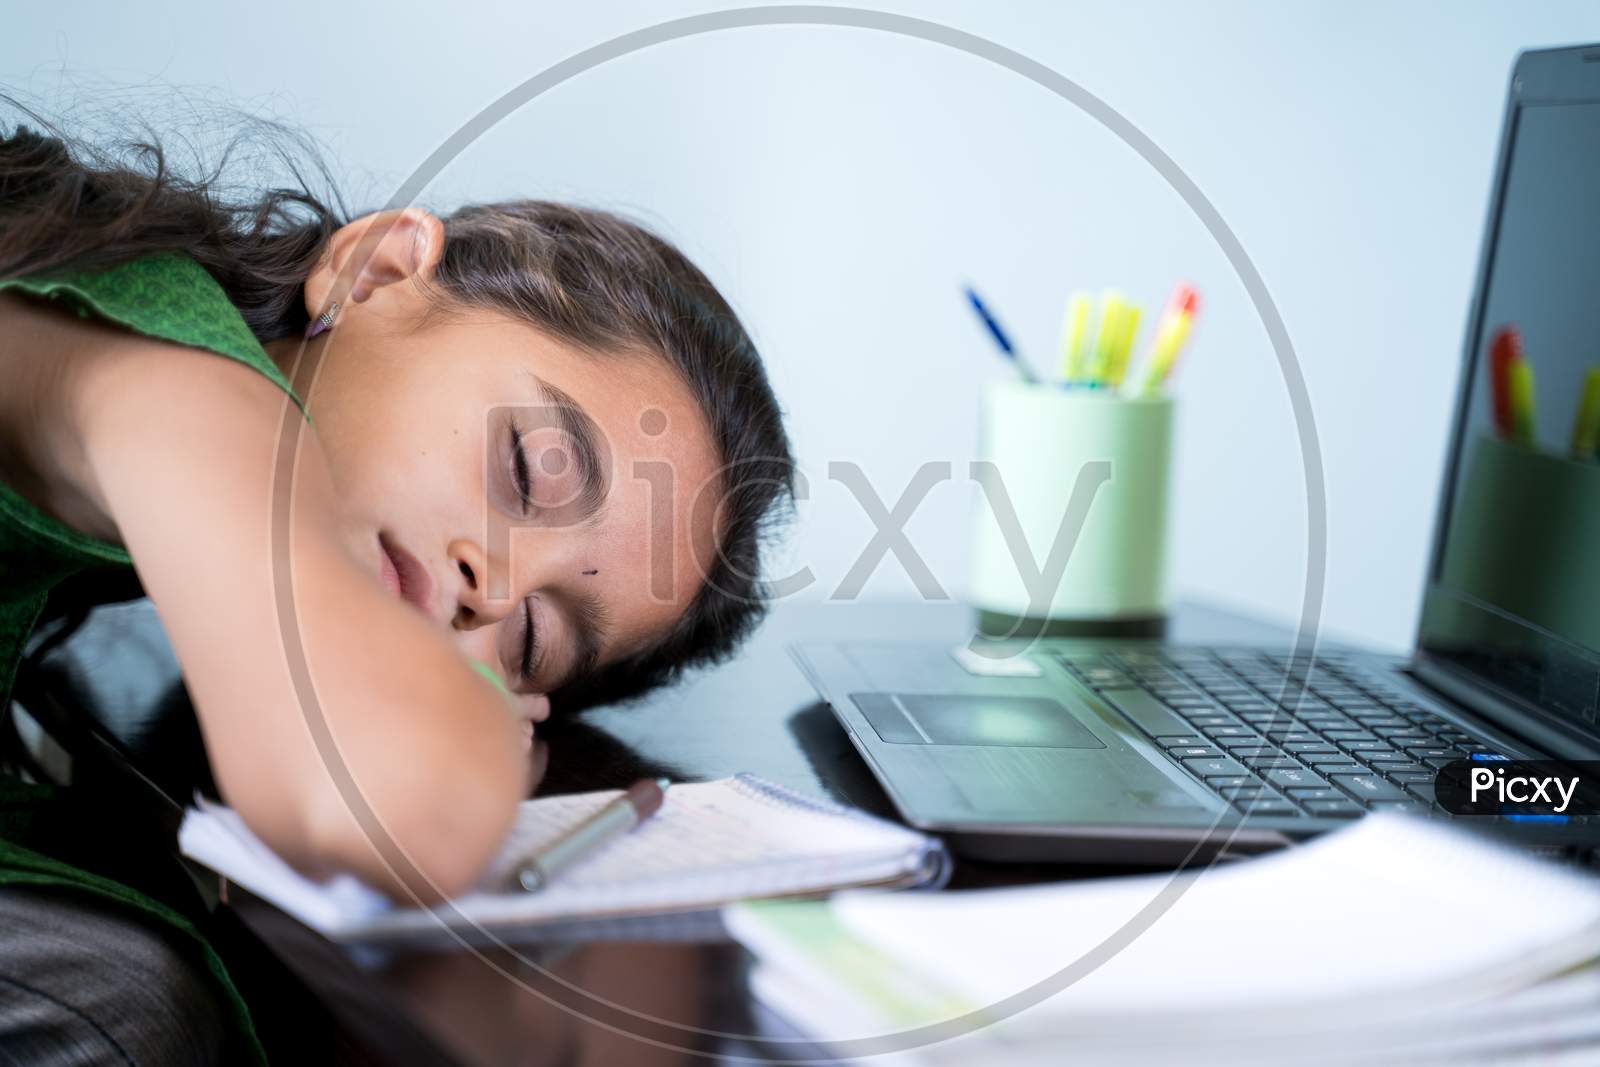 Bored Girl Child Slept Infront Of Laptop - Concept Of Kid Tired From E-Learning Or Online Education At Home During Covid-19 Or Coronavirus Outbreak.